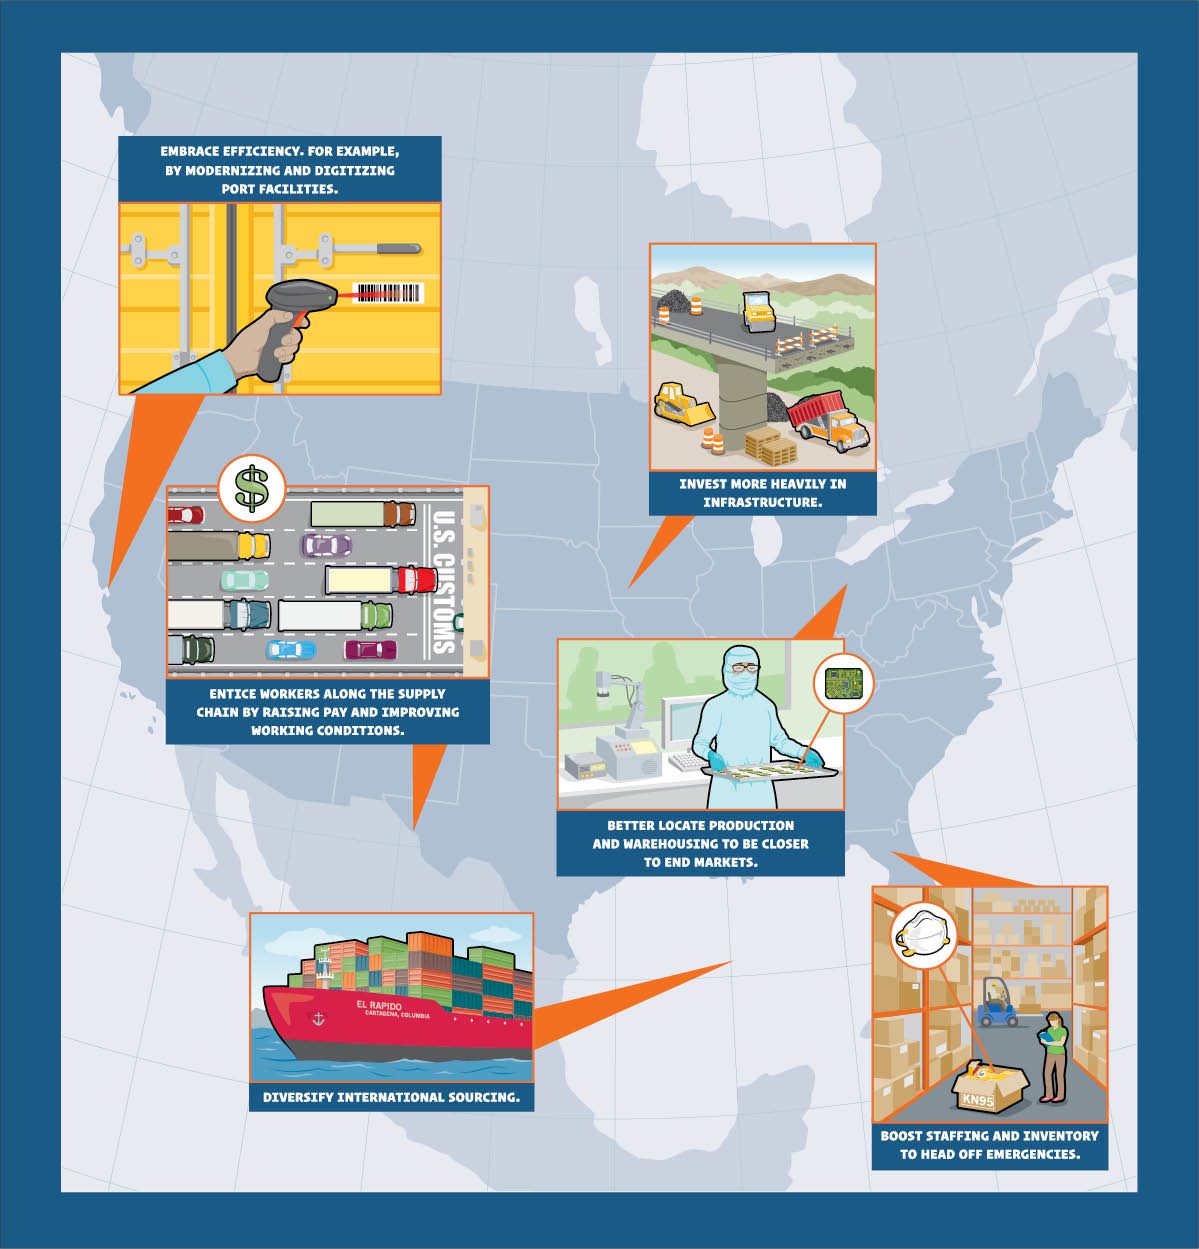 Infographic of U.S. map with six ideas for improving supply chains: Embracing efficiency, investing more heavily in infrastructure, better locating production and warehousing to be closer to end markets, enticing workers by raising pay and improving working conditions, boosting staffing and inventory to head of emergencies, and diversifying international sourcing.